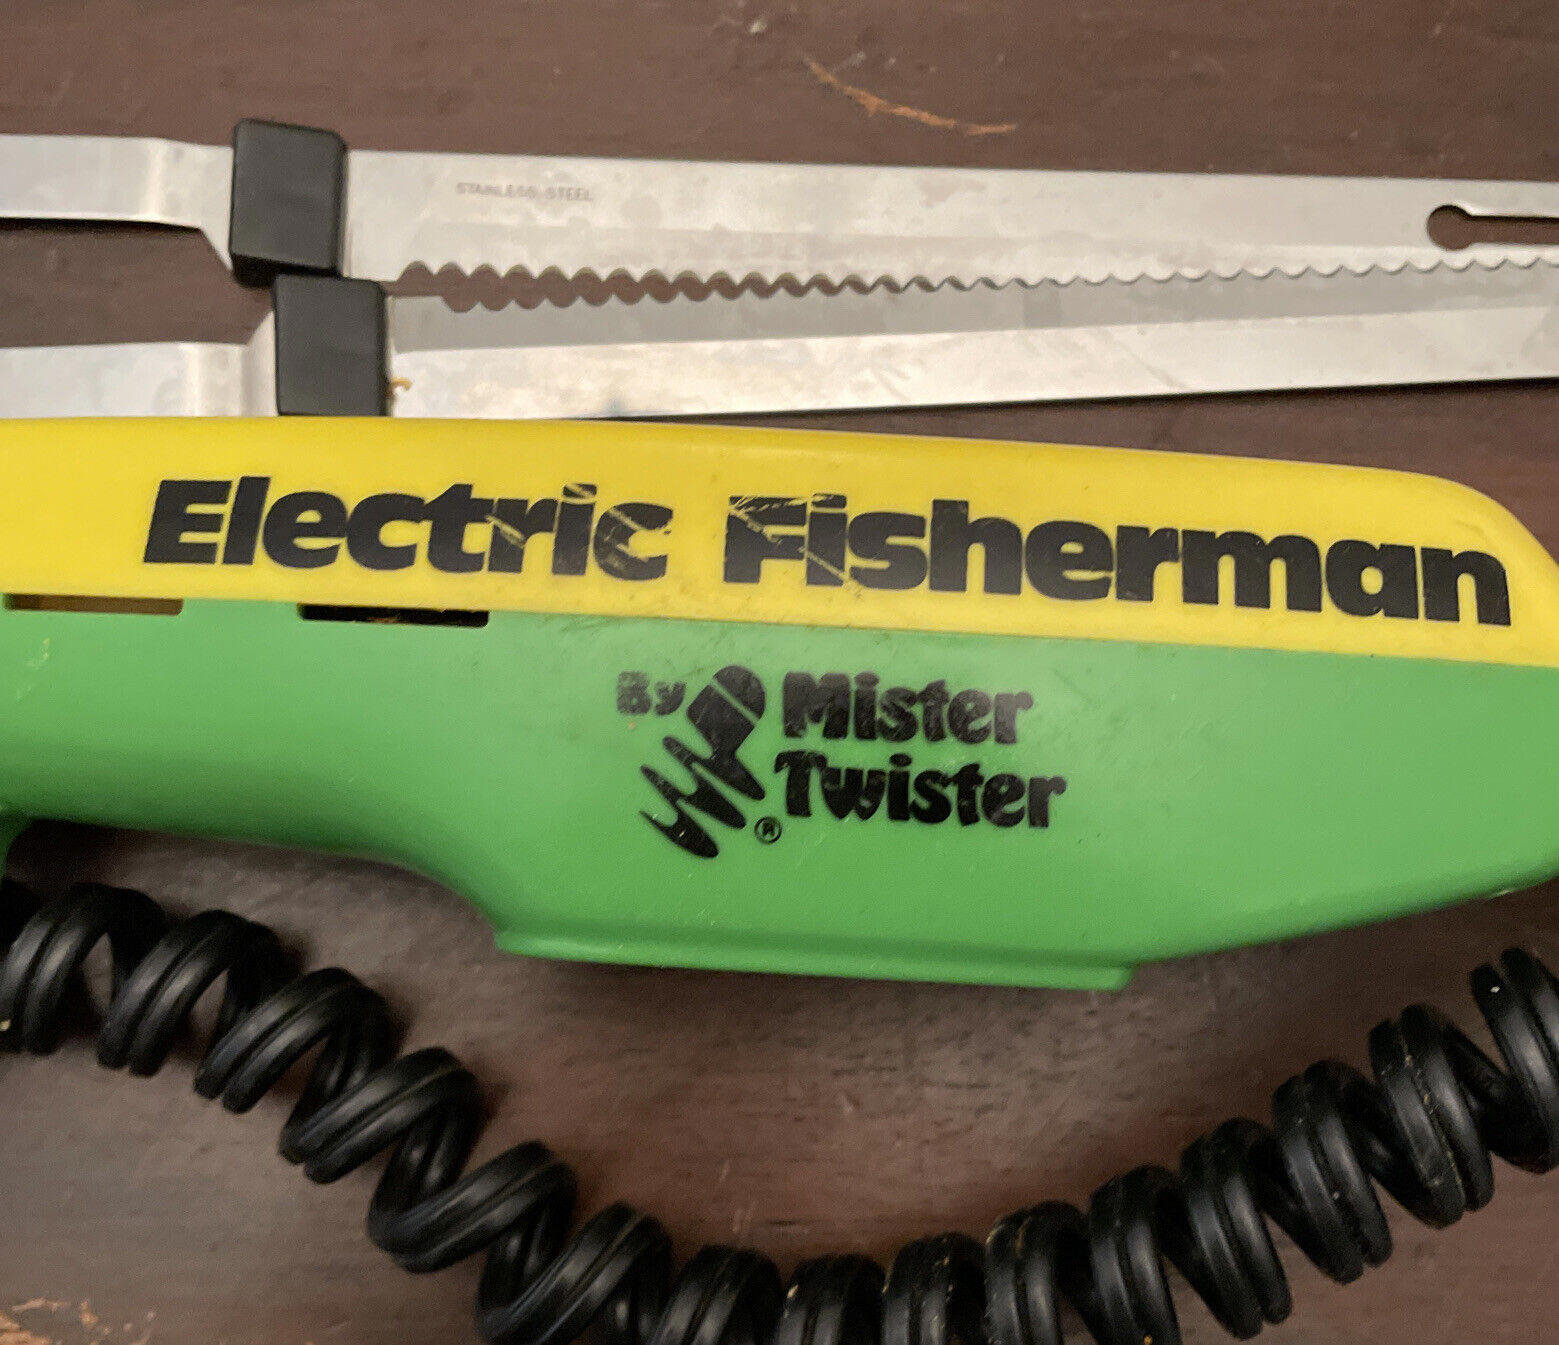 Mister Twister Electric Fisherman Fishing Filet Knife MT-1201  TESTED/WORKING 